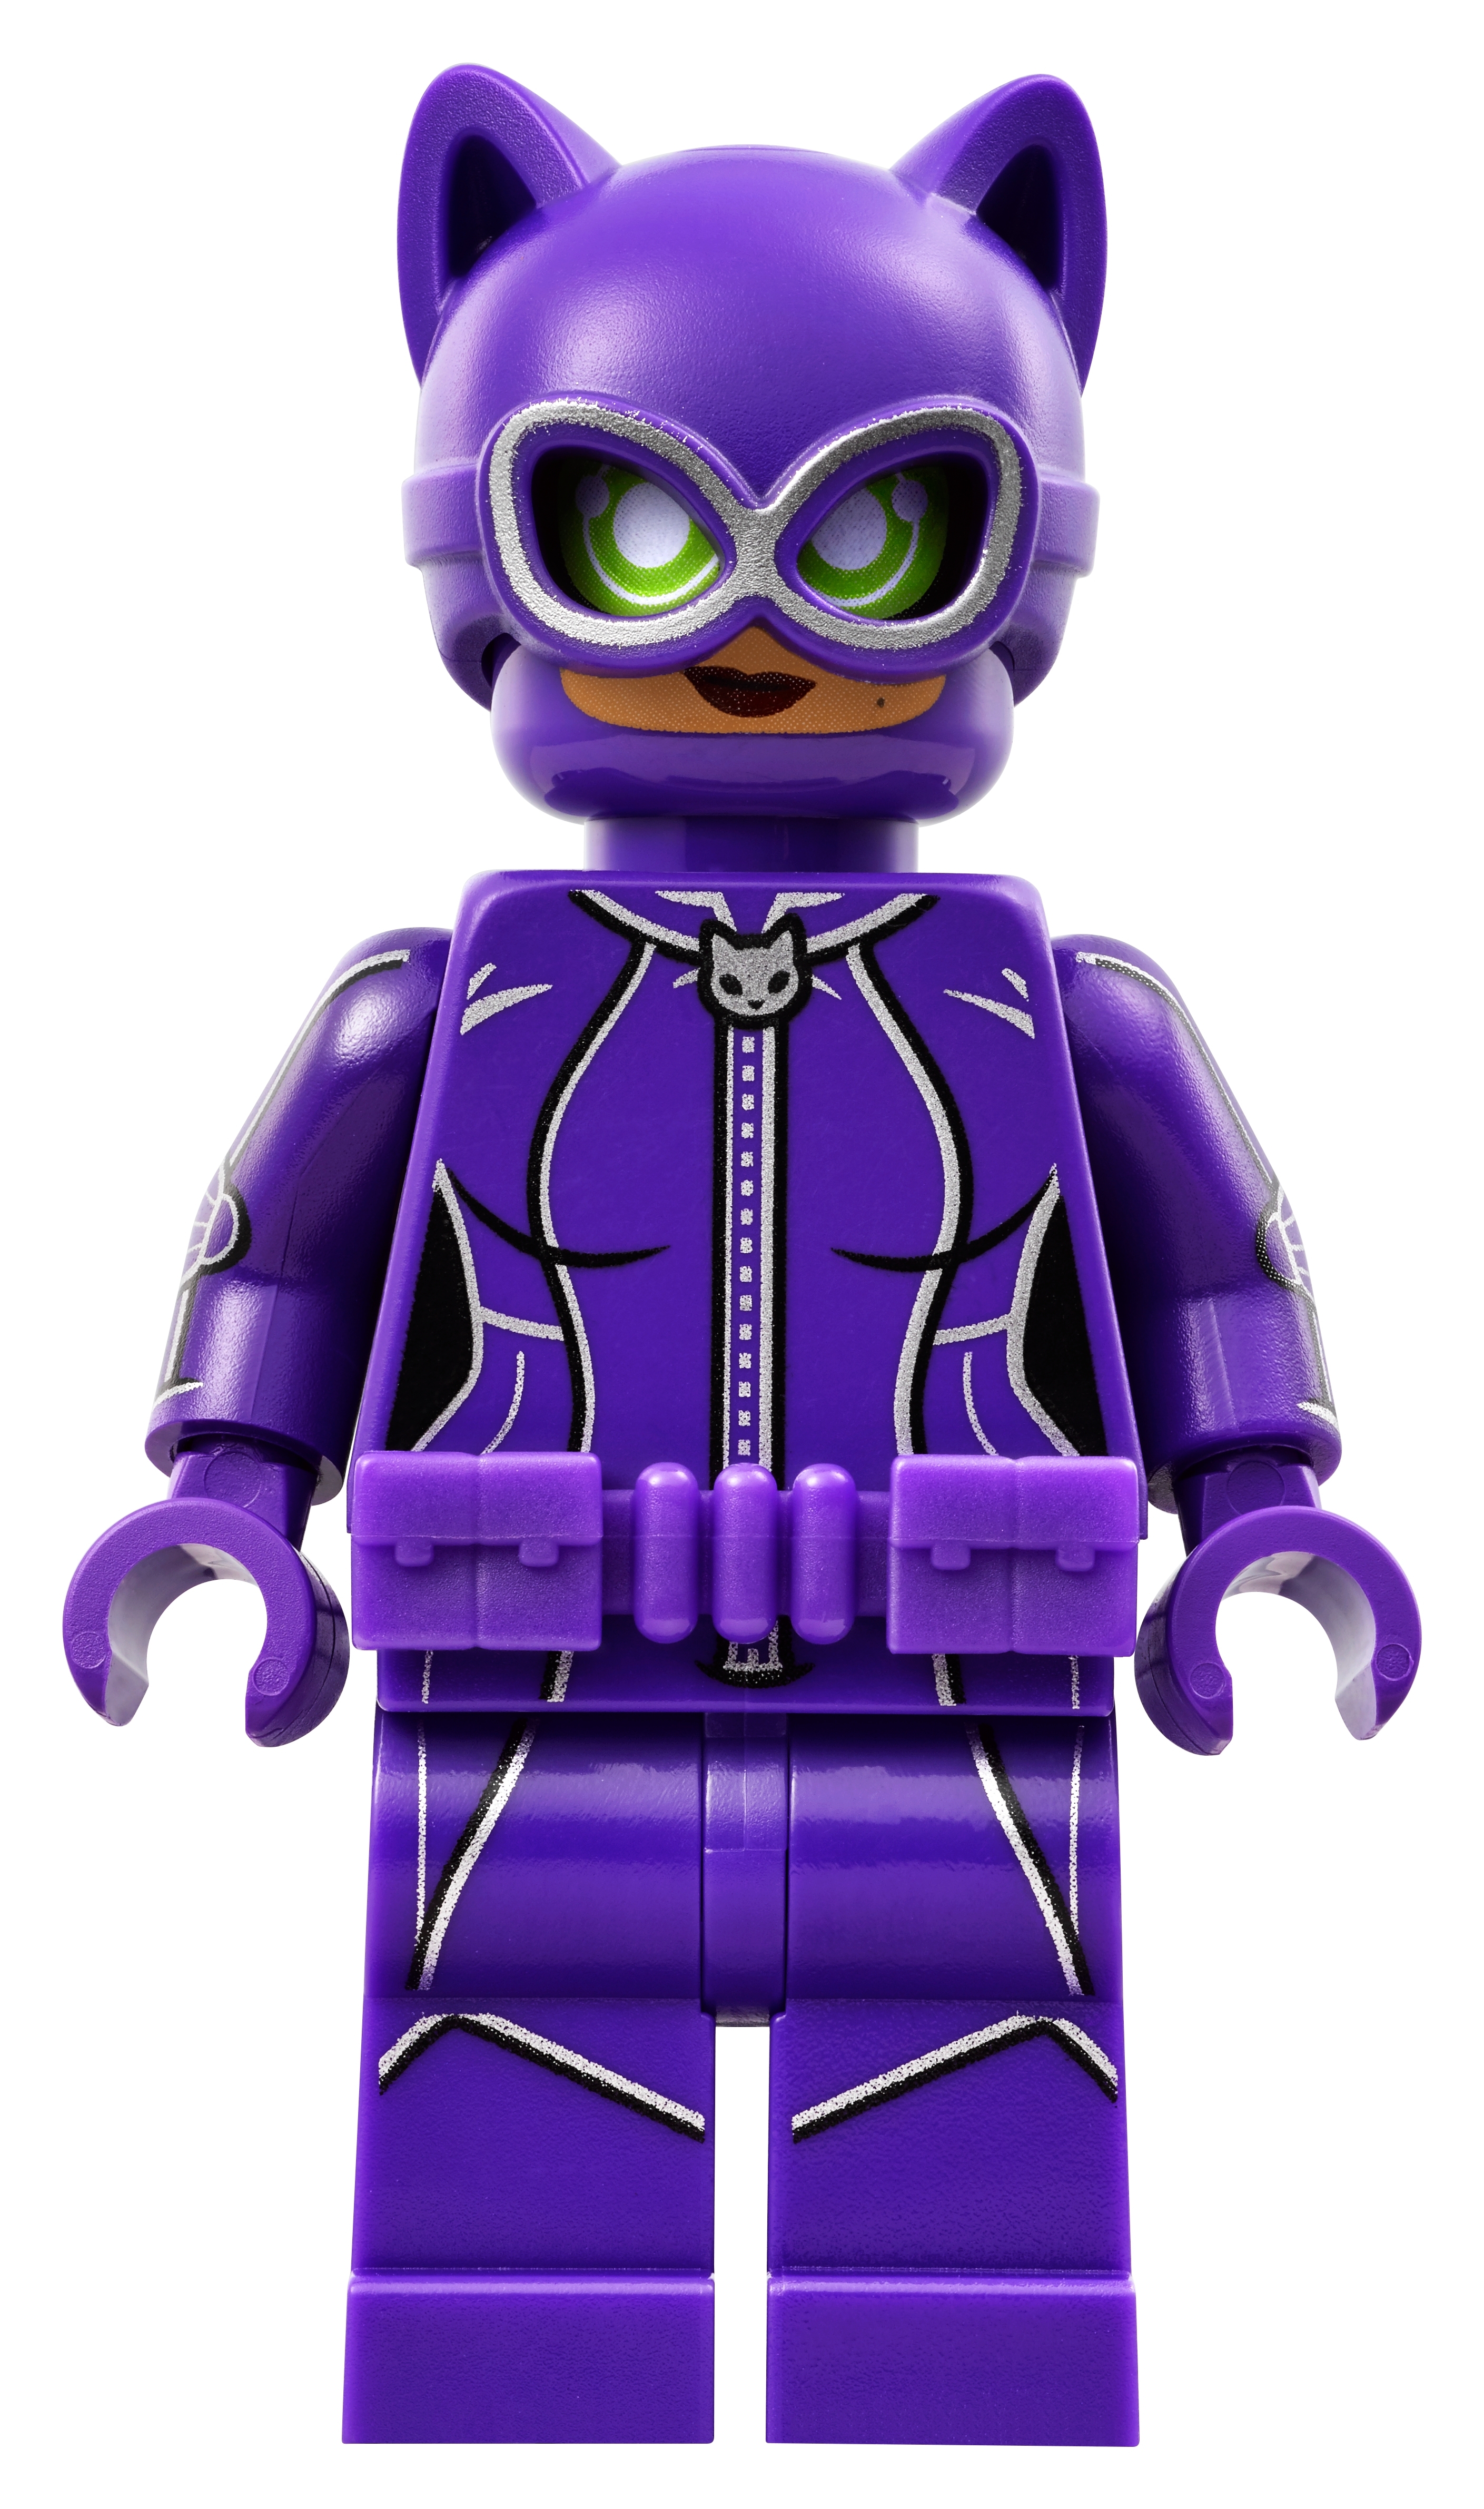 LEGO NEW PURPLE CATWOMAN MINIFIGURE SUPERHEROES FIGURE FROM CATCYCLE SET 